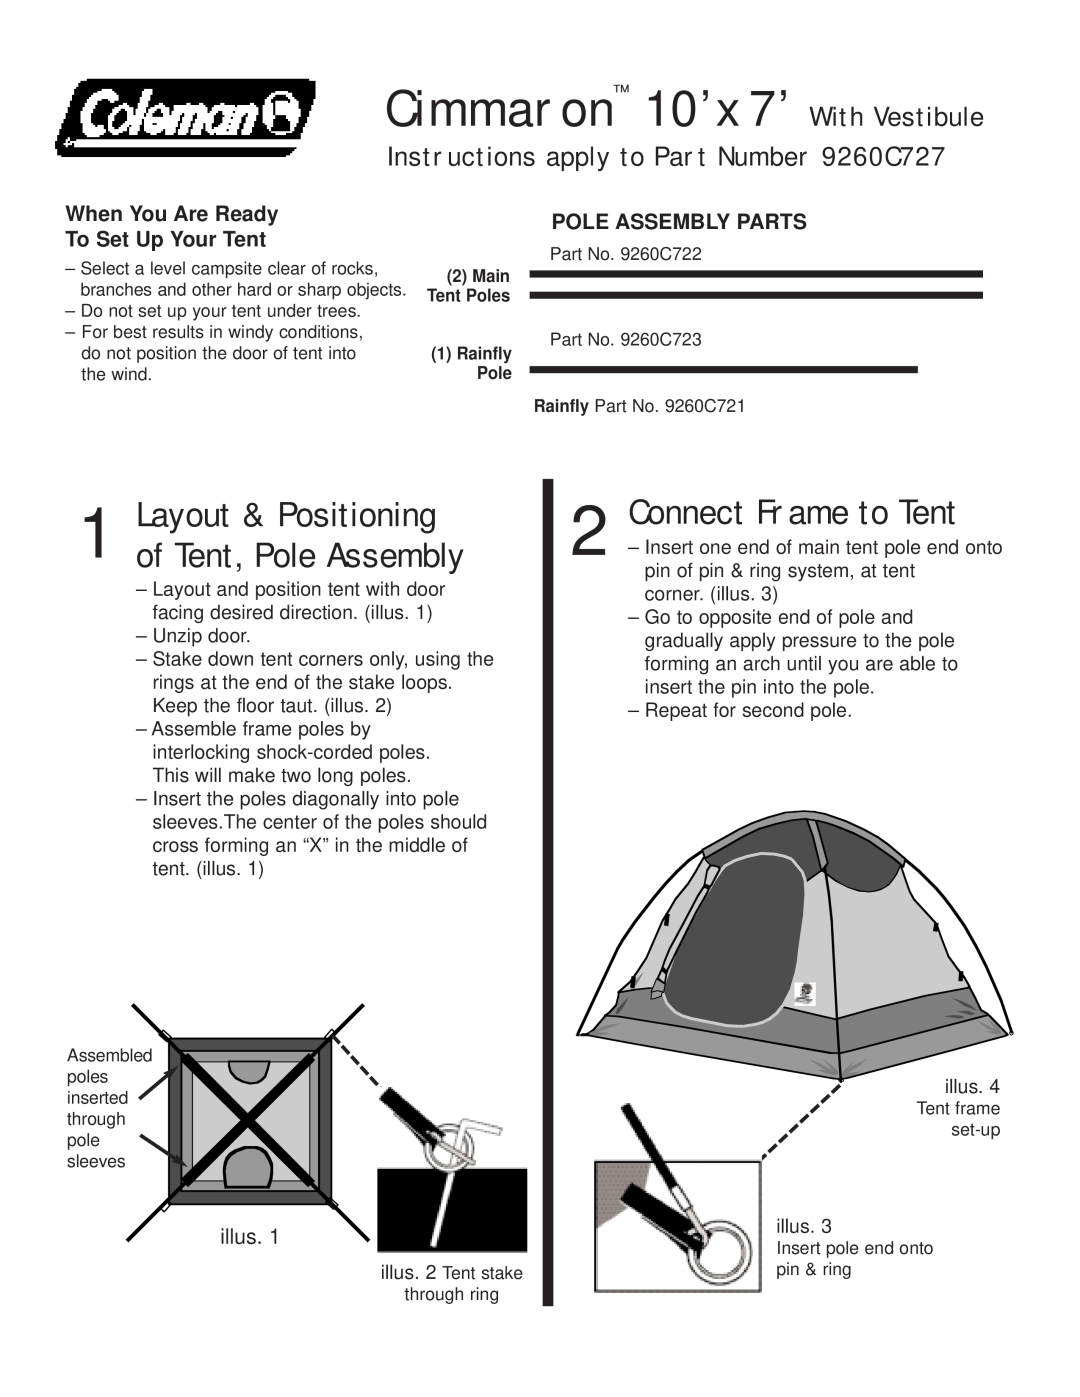 Coleman manual Connect Frame to Tent, Instructions apply to Part Number 9260C727, Pole Assembly Parts, illus 